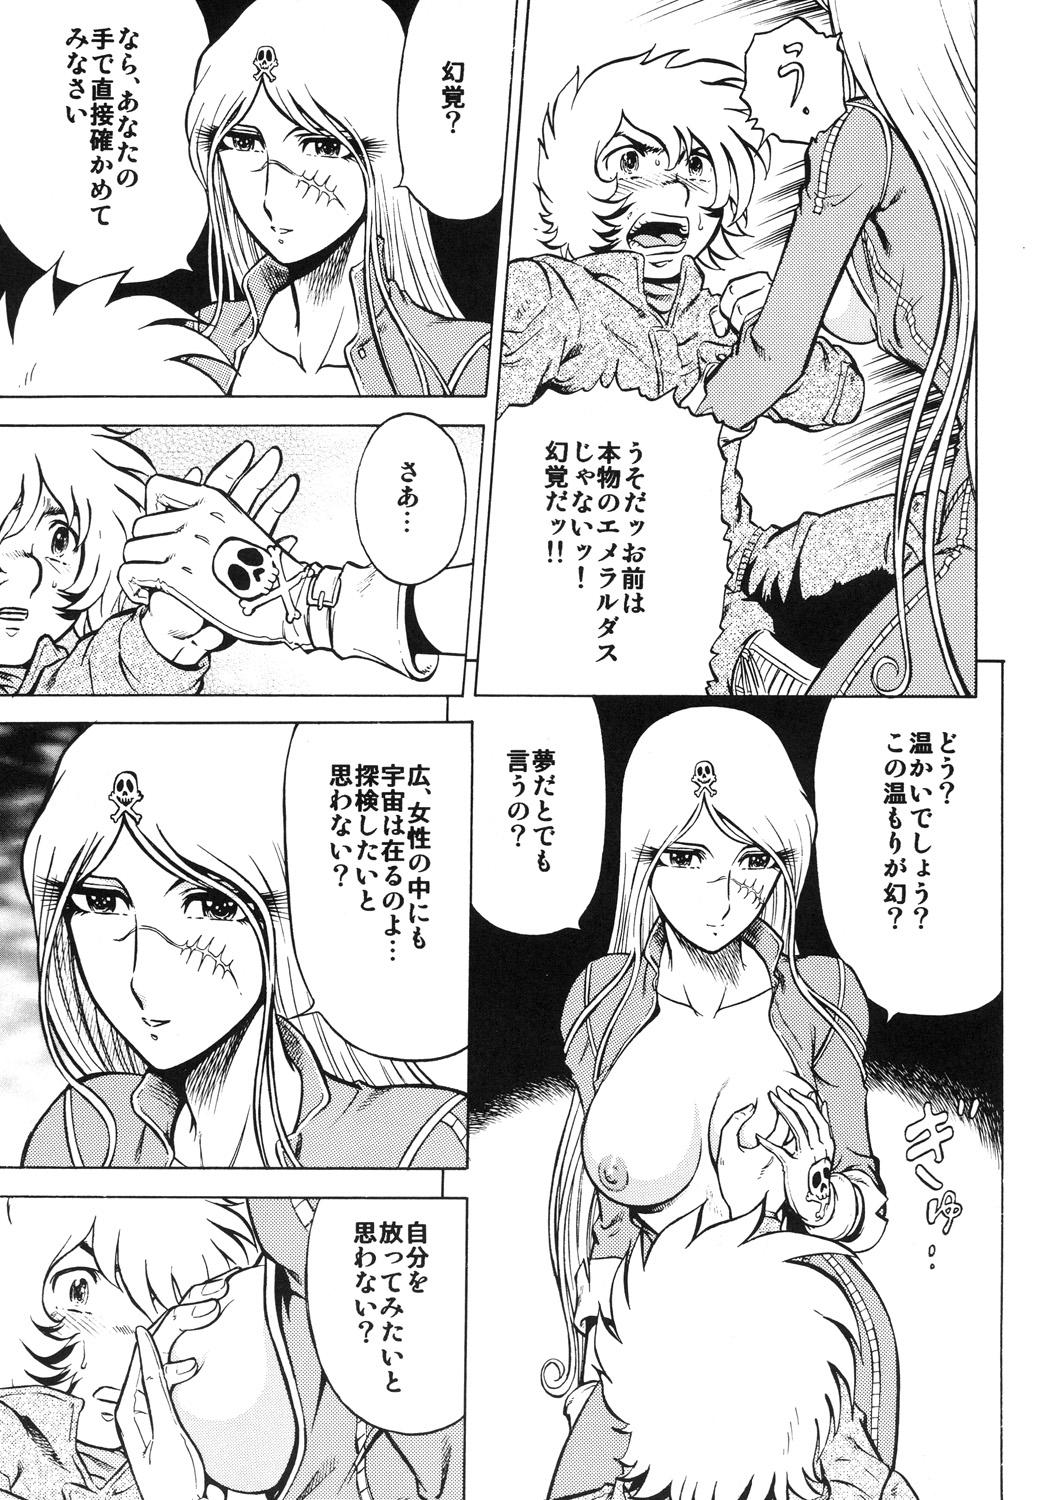 Job NightHead+2 - Space pirate captain harlock Anale - Page 10